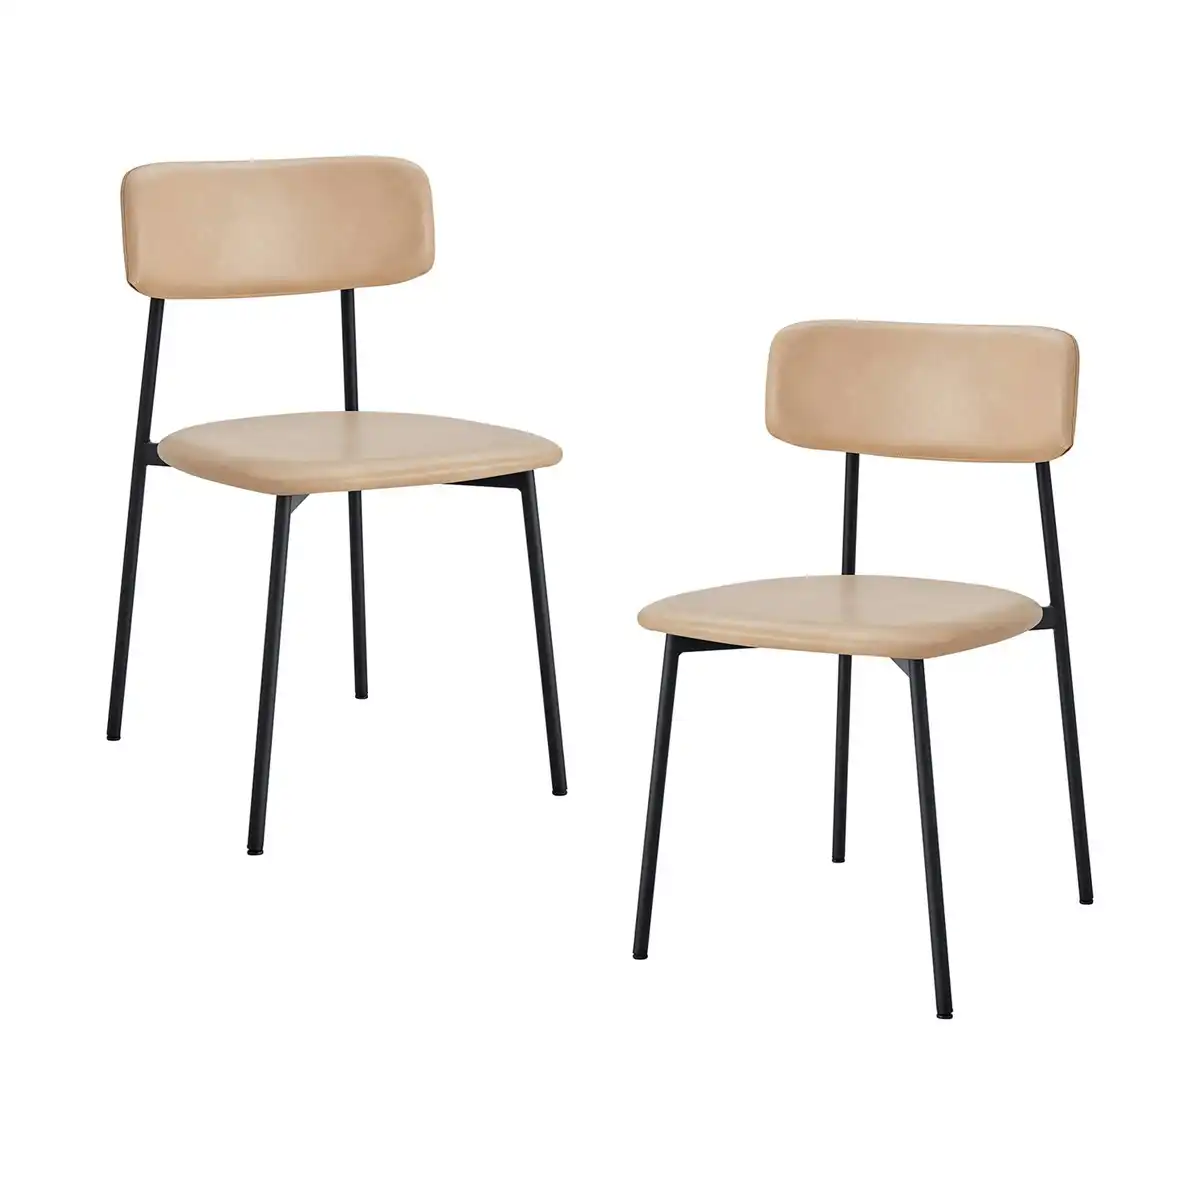 Bailey Leatherette Dining Chair (Set of 2, Black, Beige)